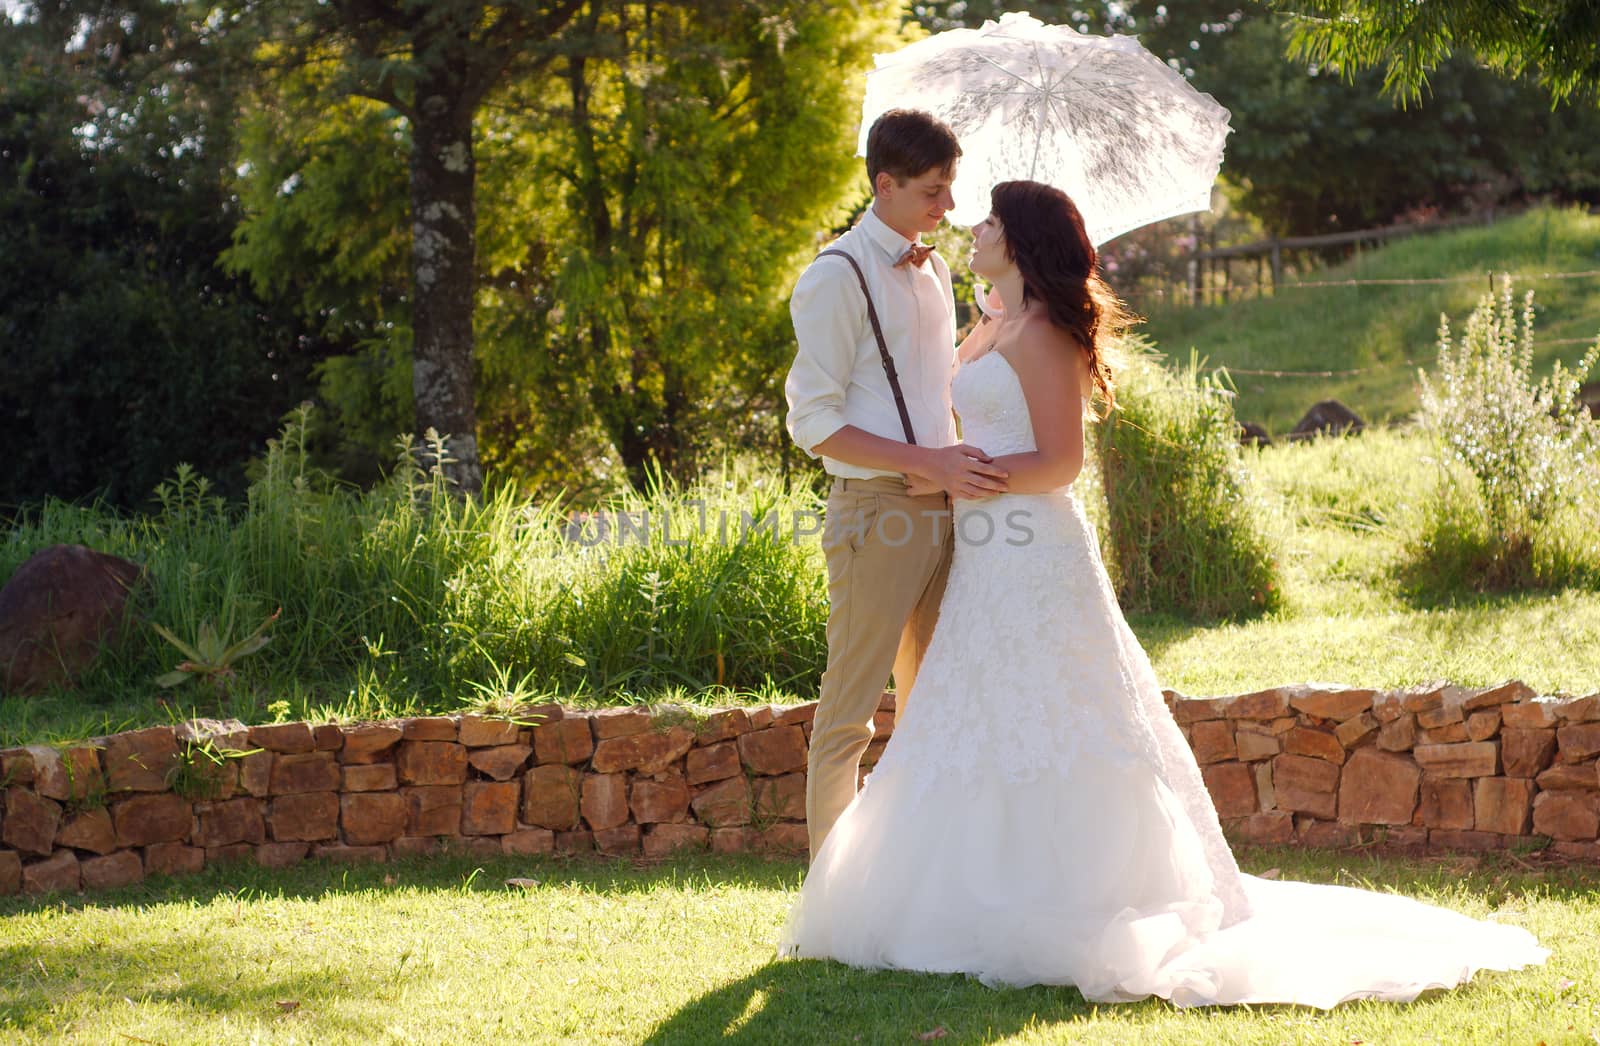 Bride and groom with parasol outside garden wedding ceremony